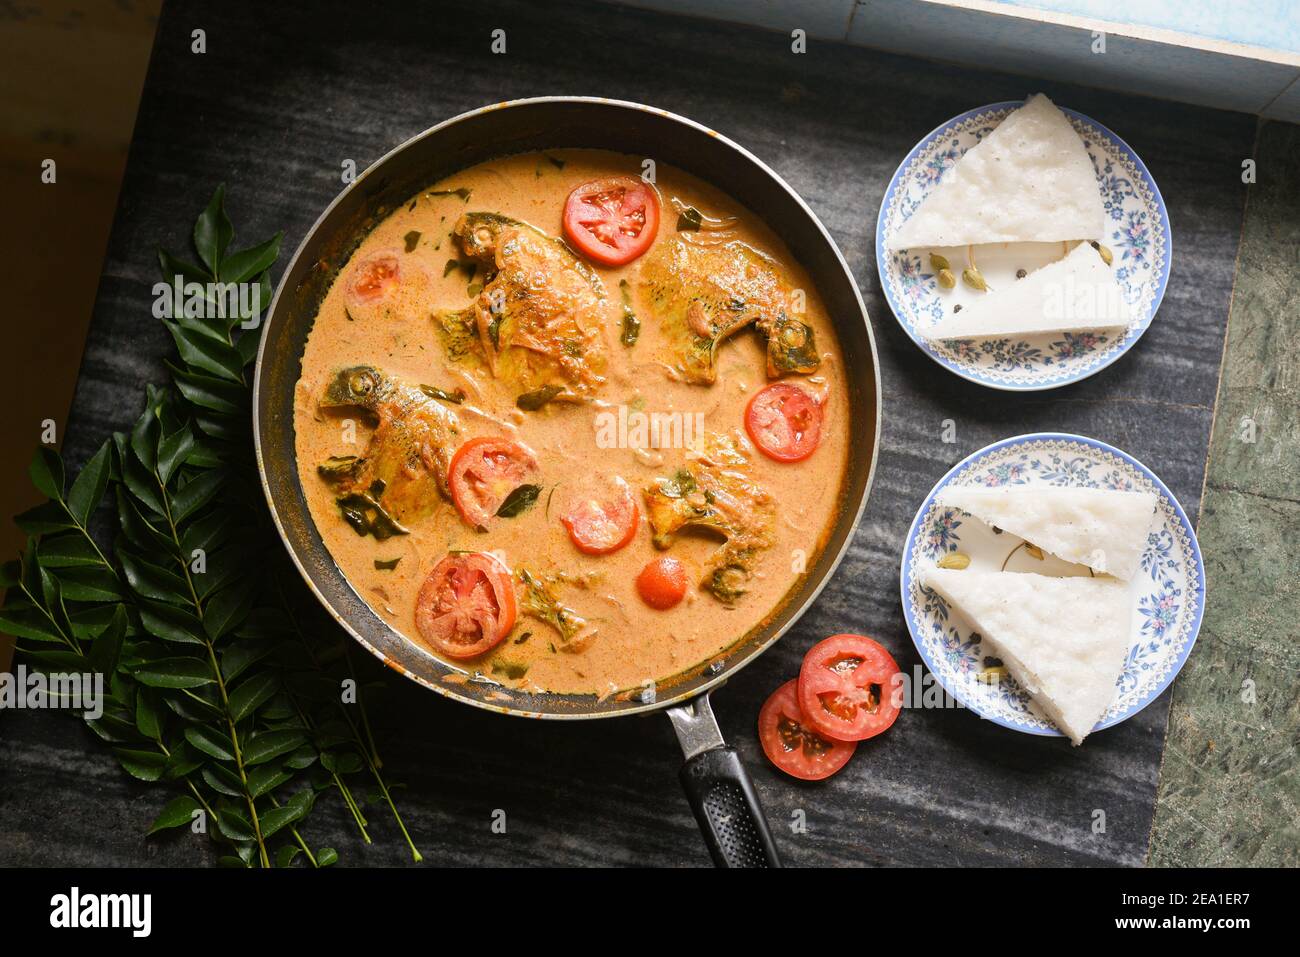 Top view spicy Kerala Style Fish curry stew and Appam Fish Molee Meen Moilee Indian food. Fish curry with coconut milk red chili, curry leaf, tomato. Stock Photo